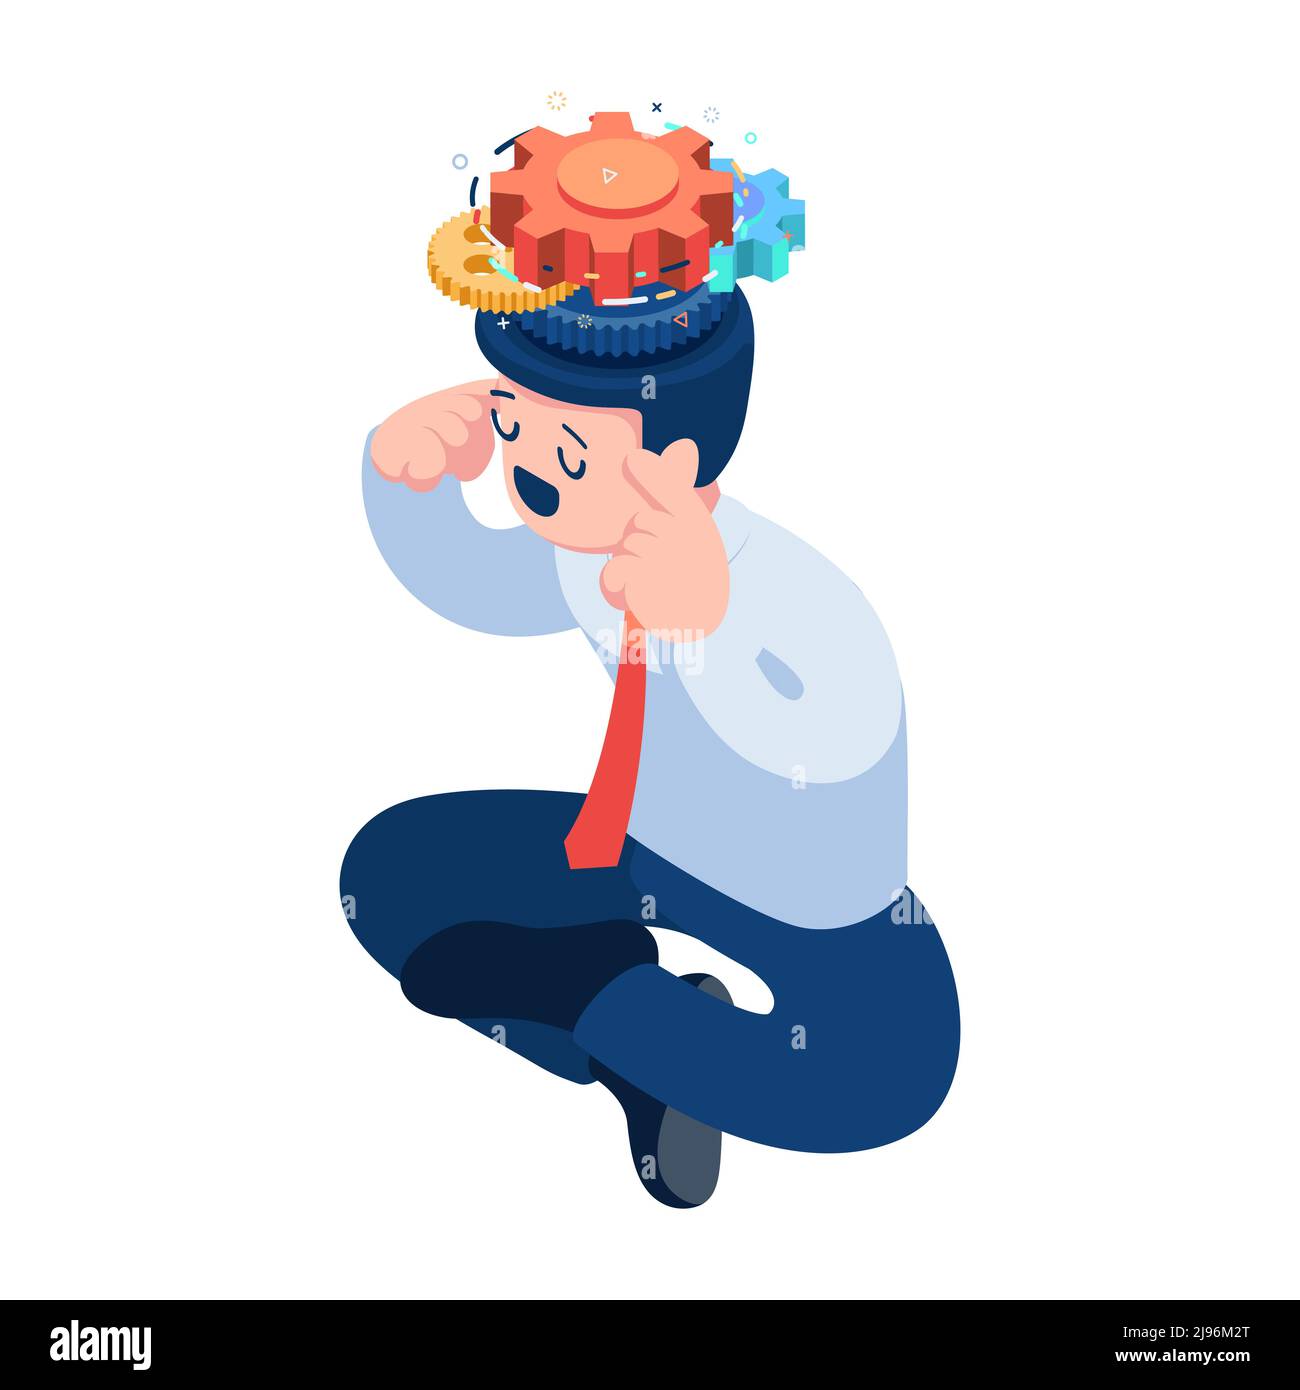 Flat 3d Isometric Businessman Thinking with Gears Mechanism Inside His Head. Process Thinking and Business Management Concept. Stock Vector